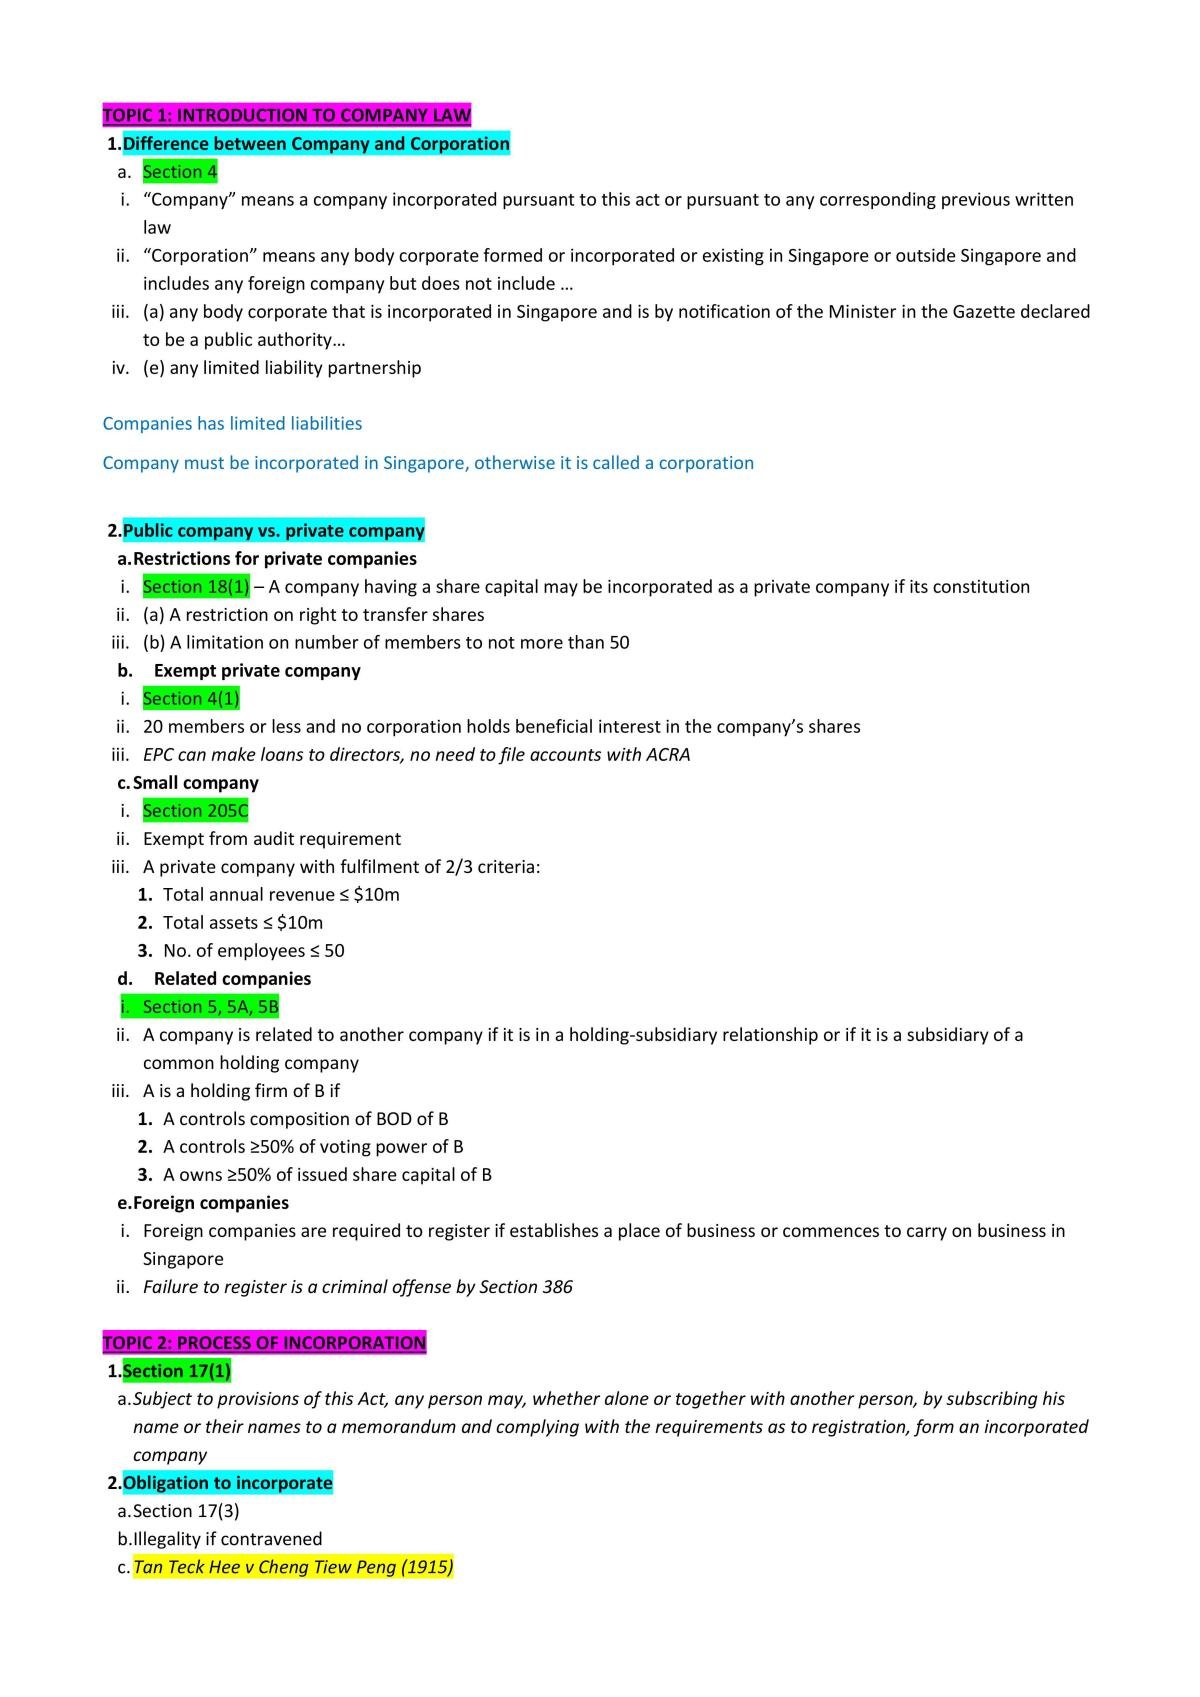 Company law notes - Page 1